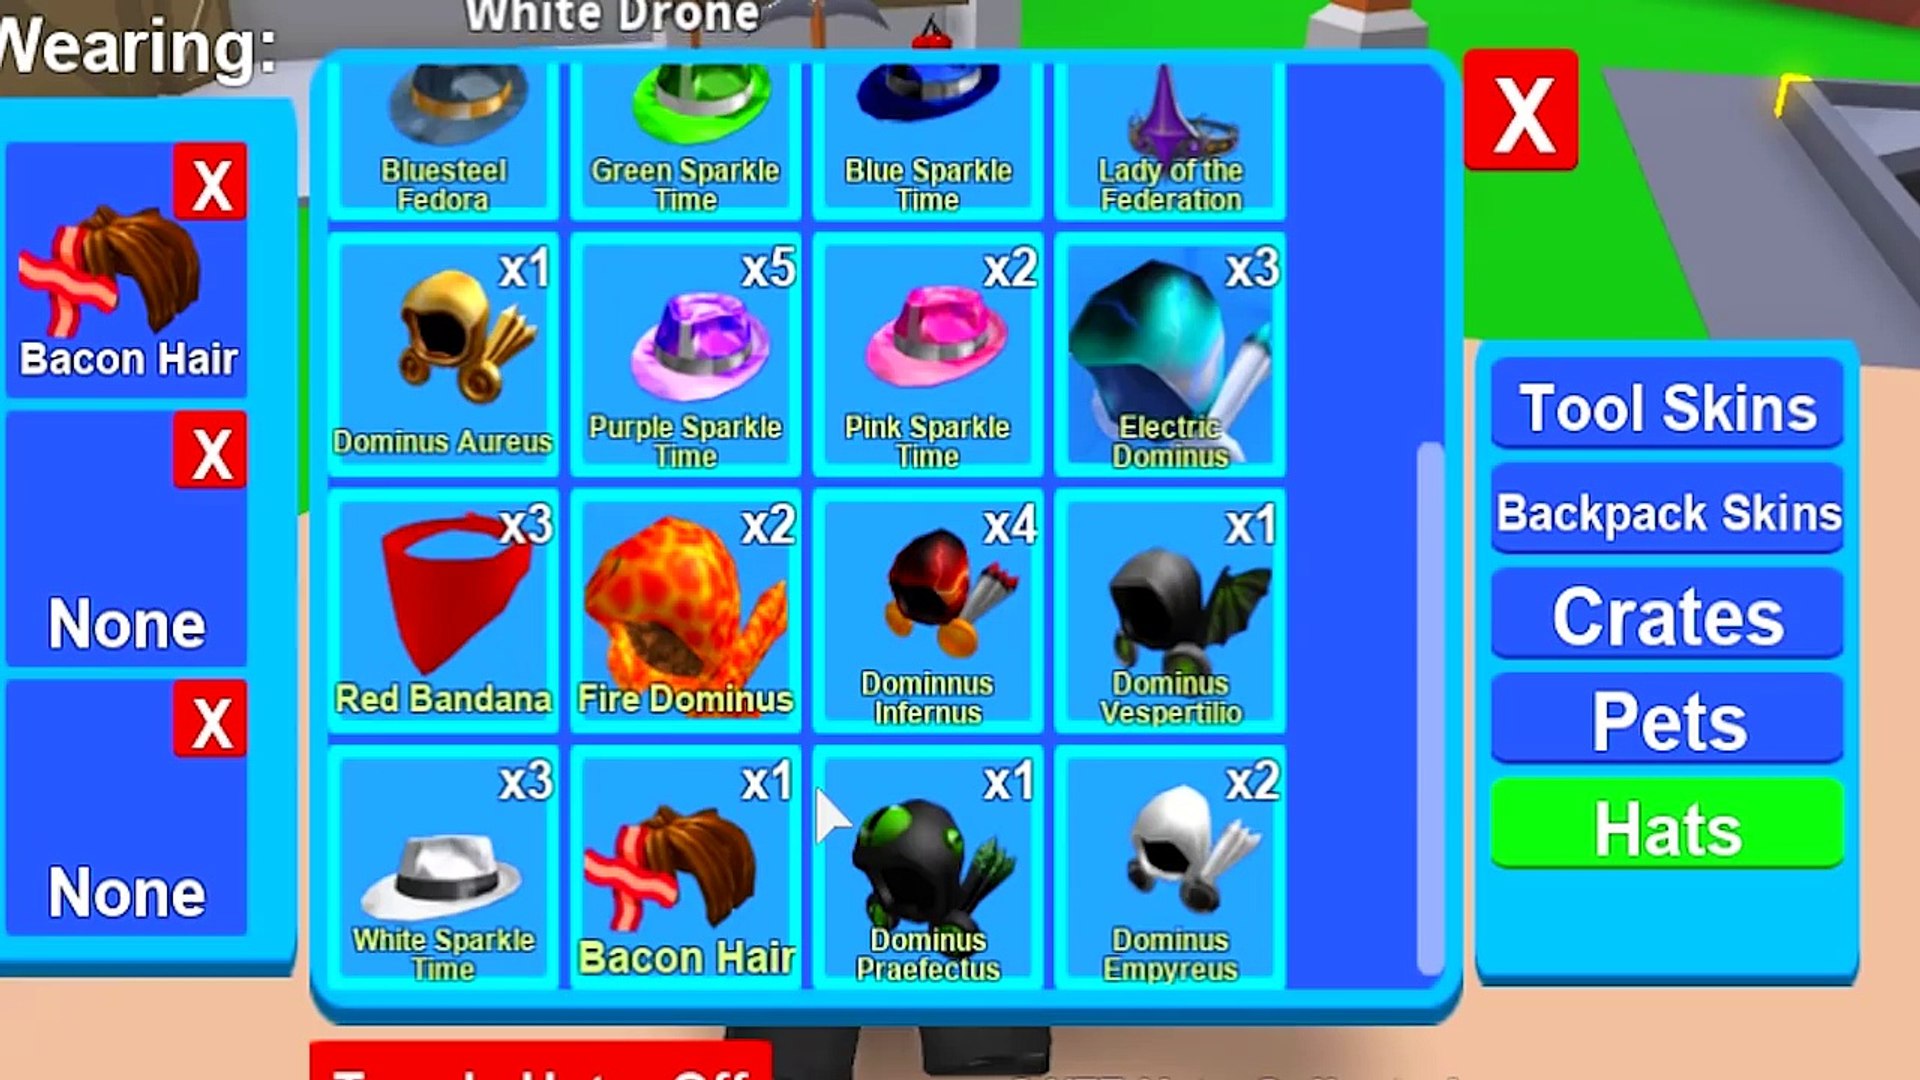 Roblox Mining Simulator Added A Hat For Me Legendary - new mythical hat crate code in roblox mining simulator video